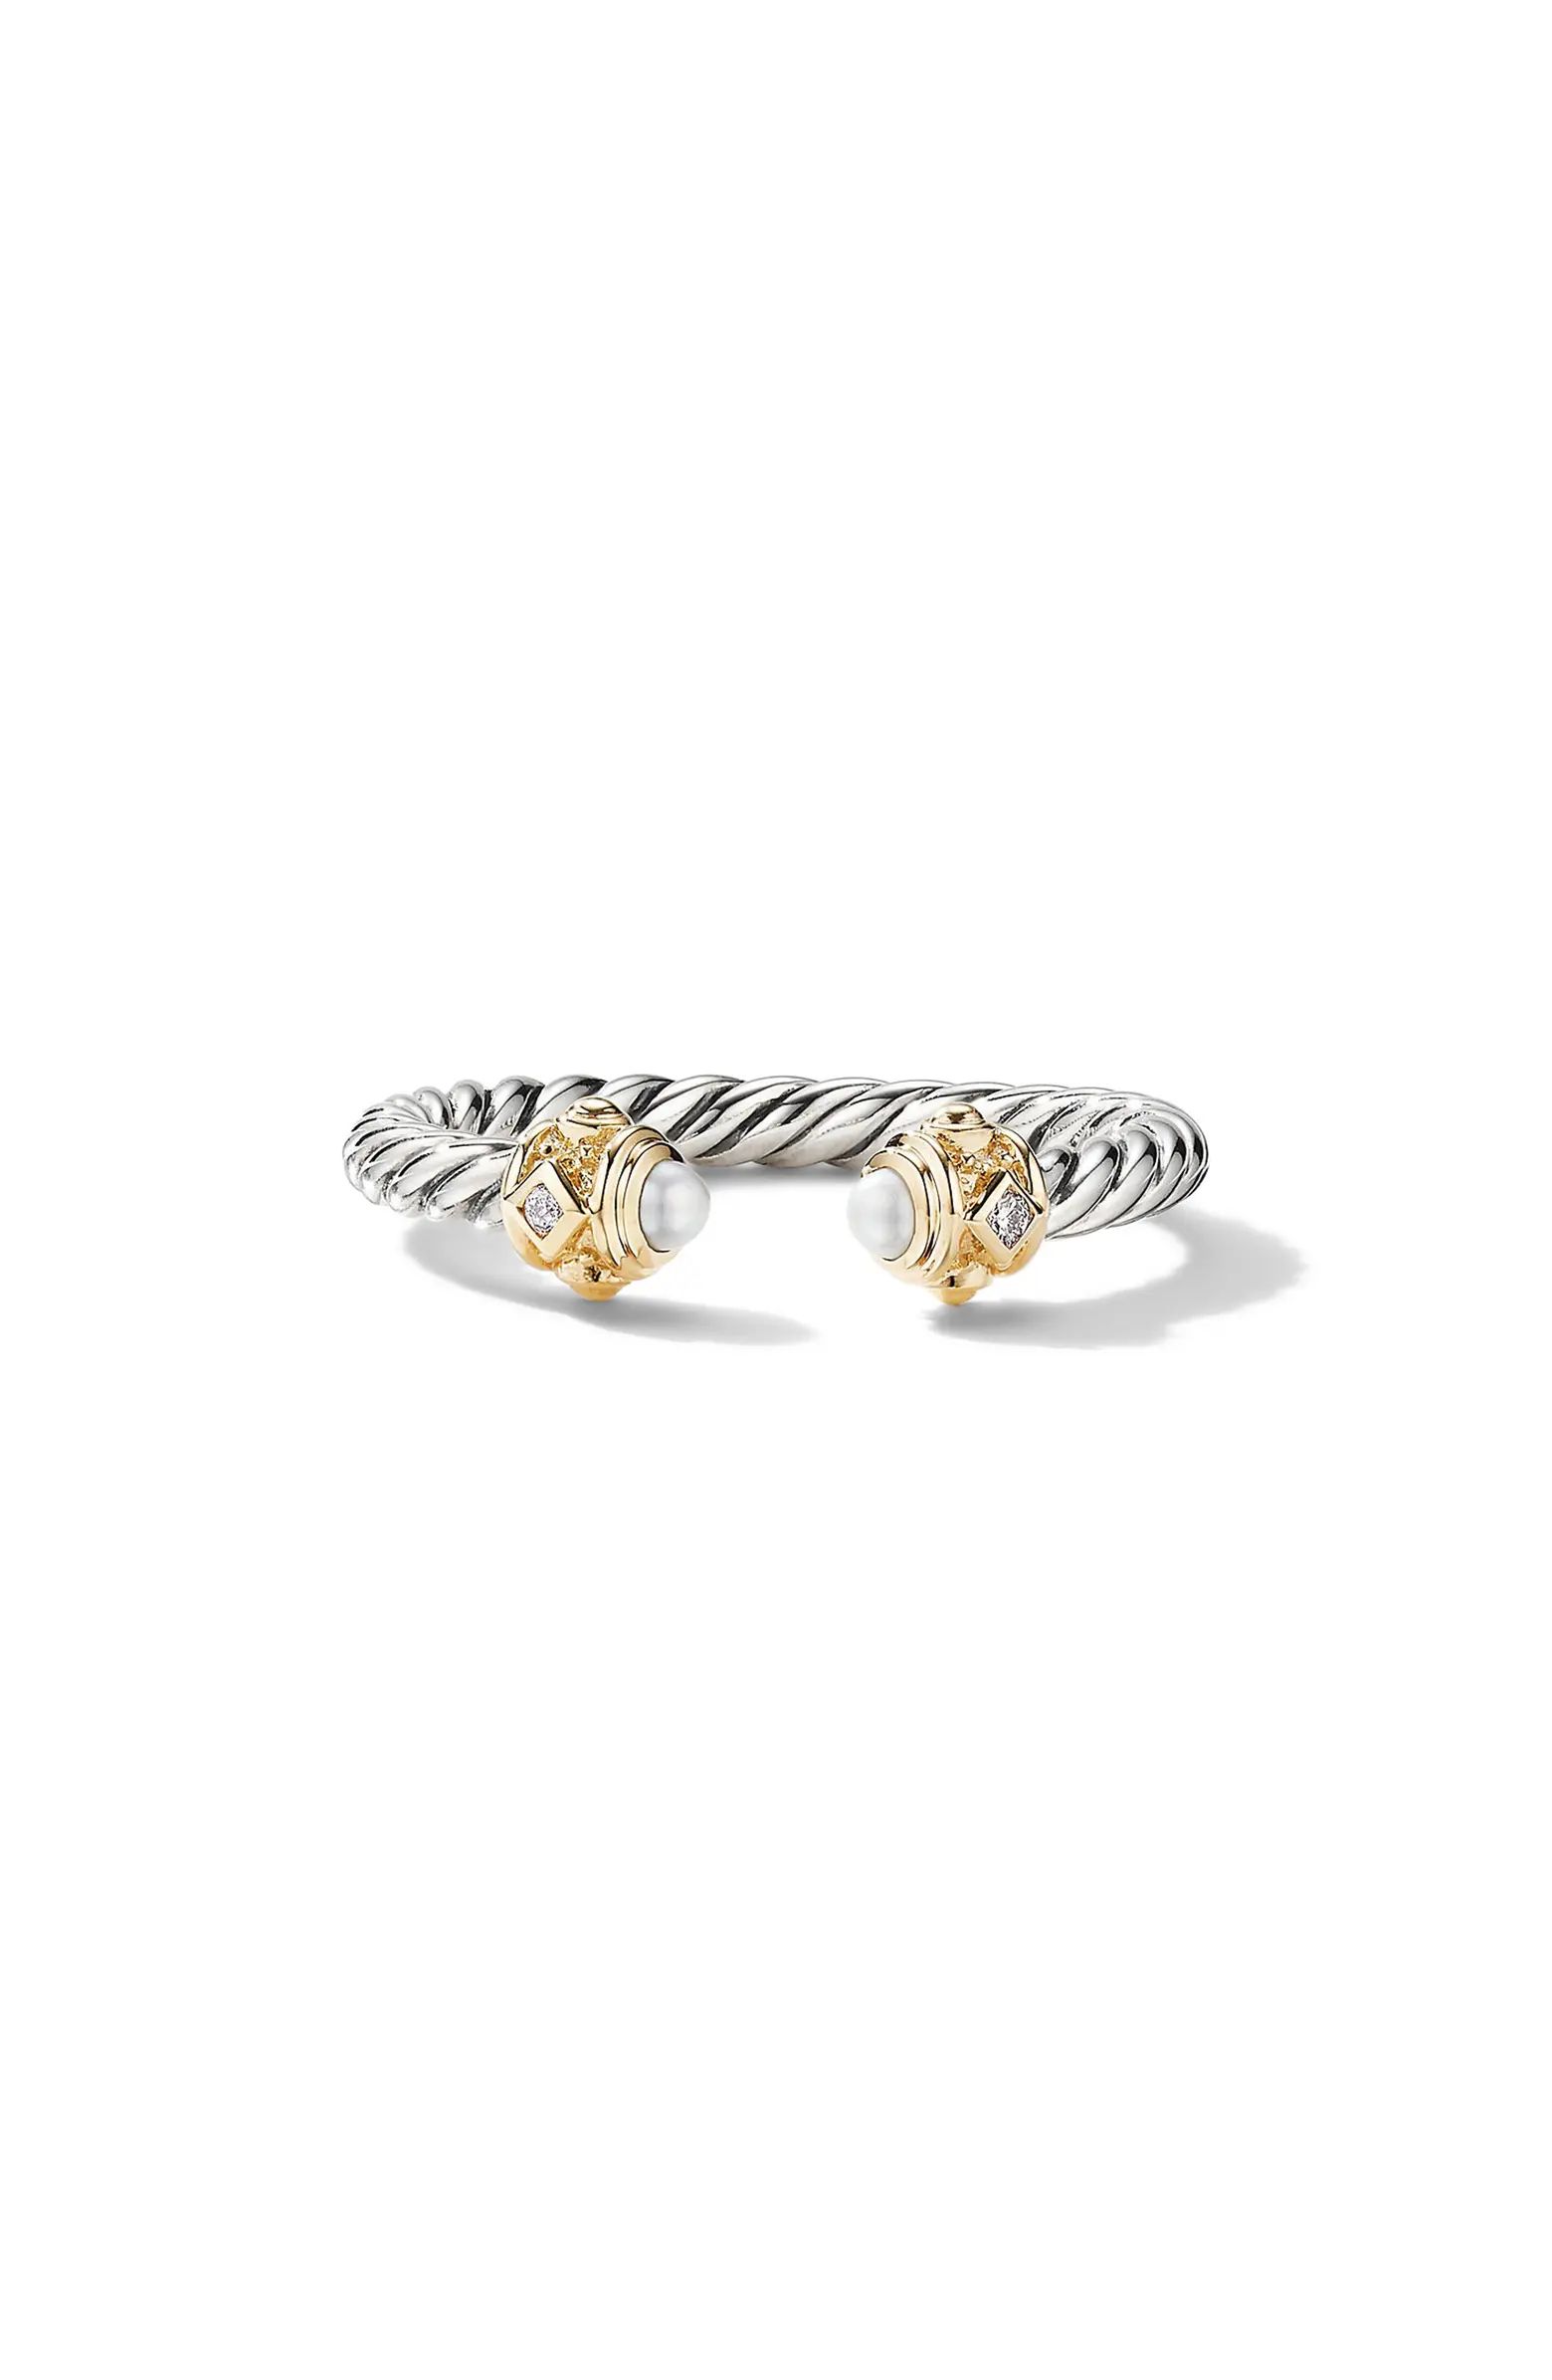 Renaissance Ring in 14K Gold with Diamonds | Nordstrom